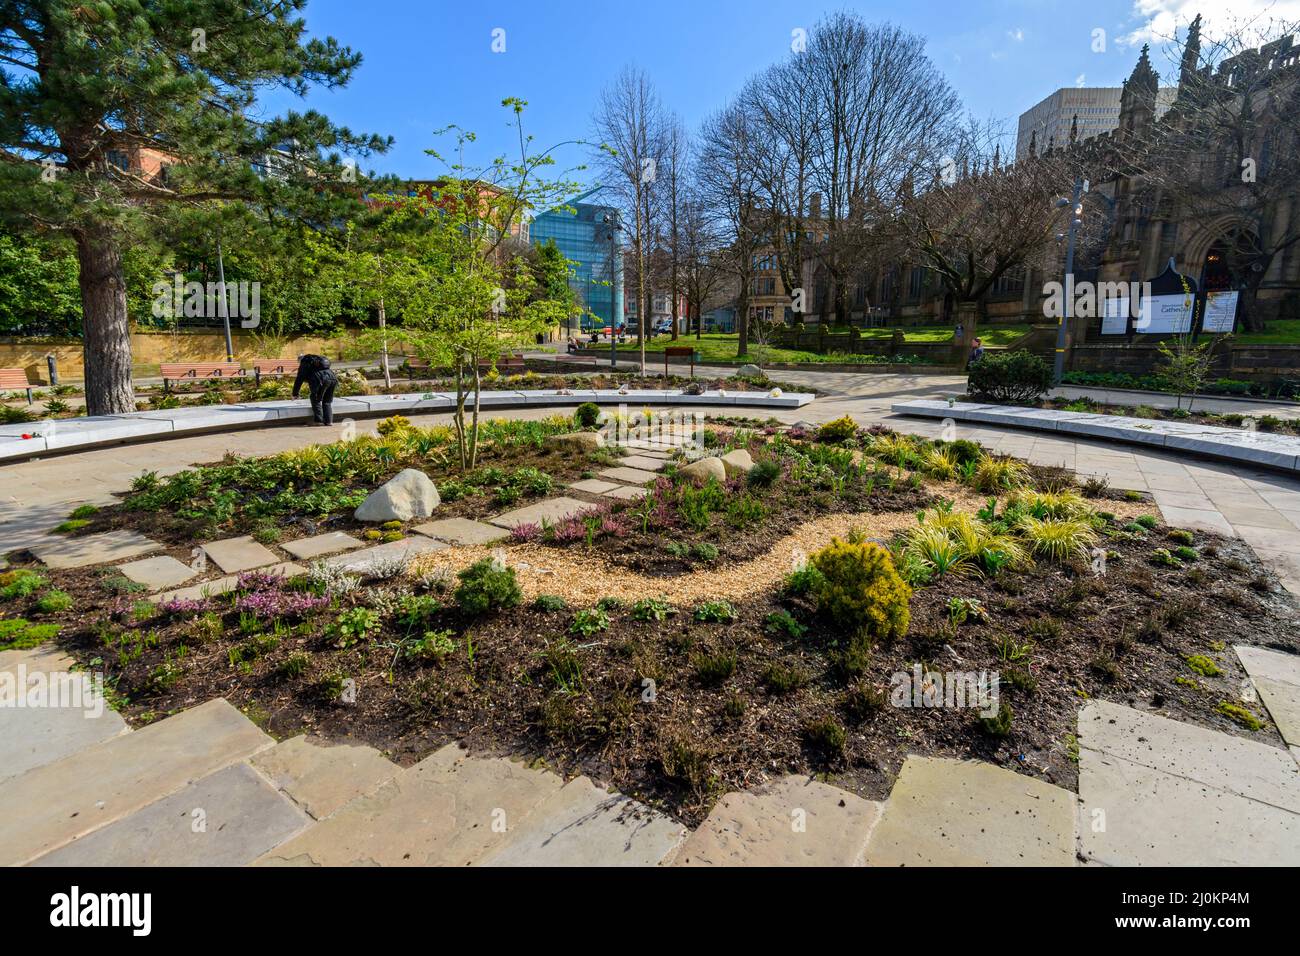 The Glade of Light Memorial Garden, Manchester, England, UK.  Commemorates the 22 victims of the Manchester Arena terrorist bombing of May 2017. Stock Photo